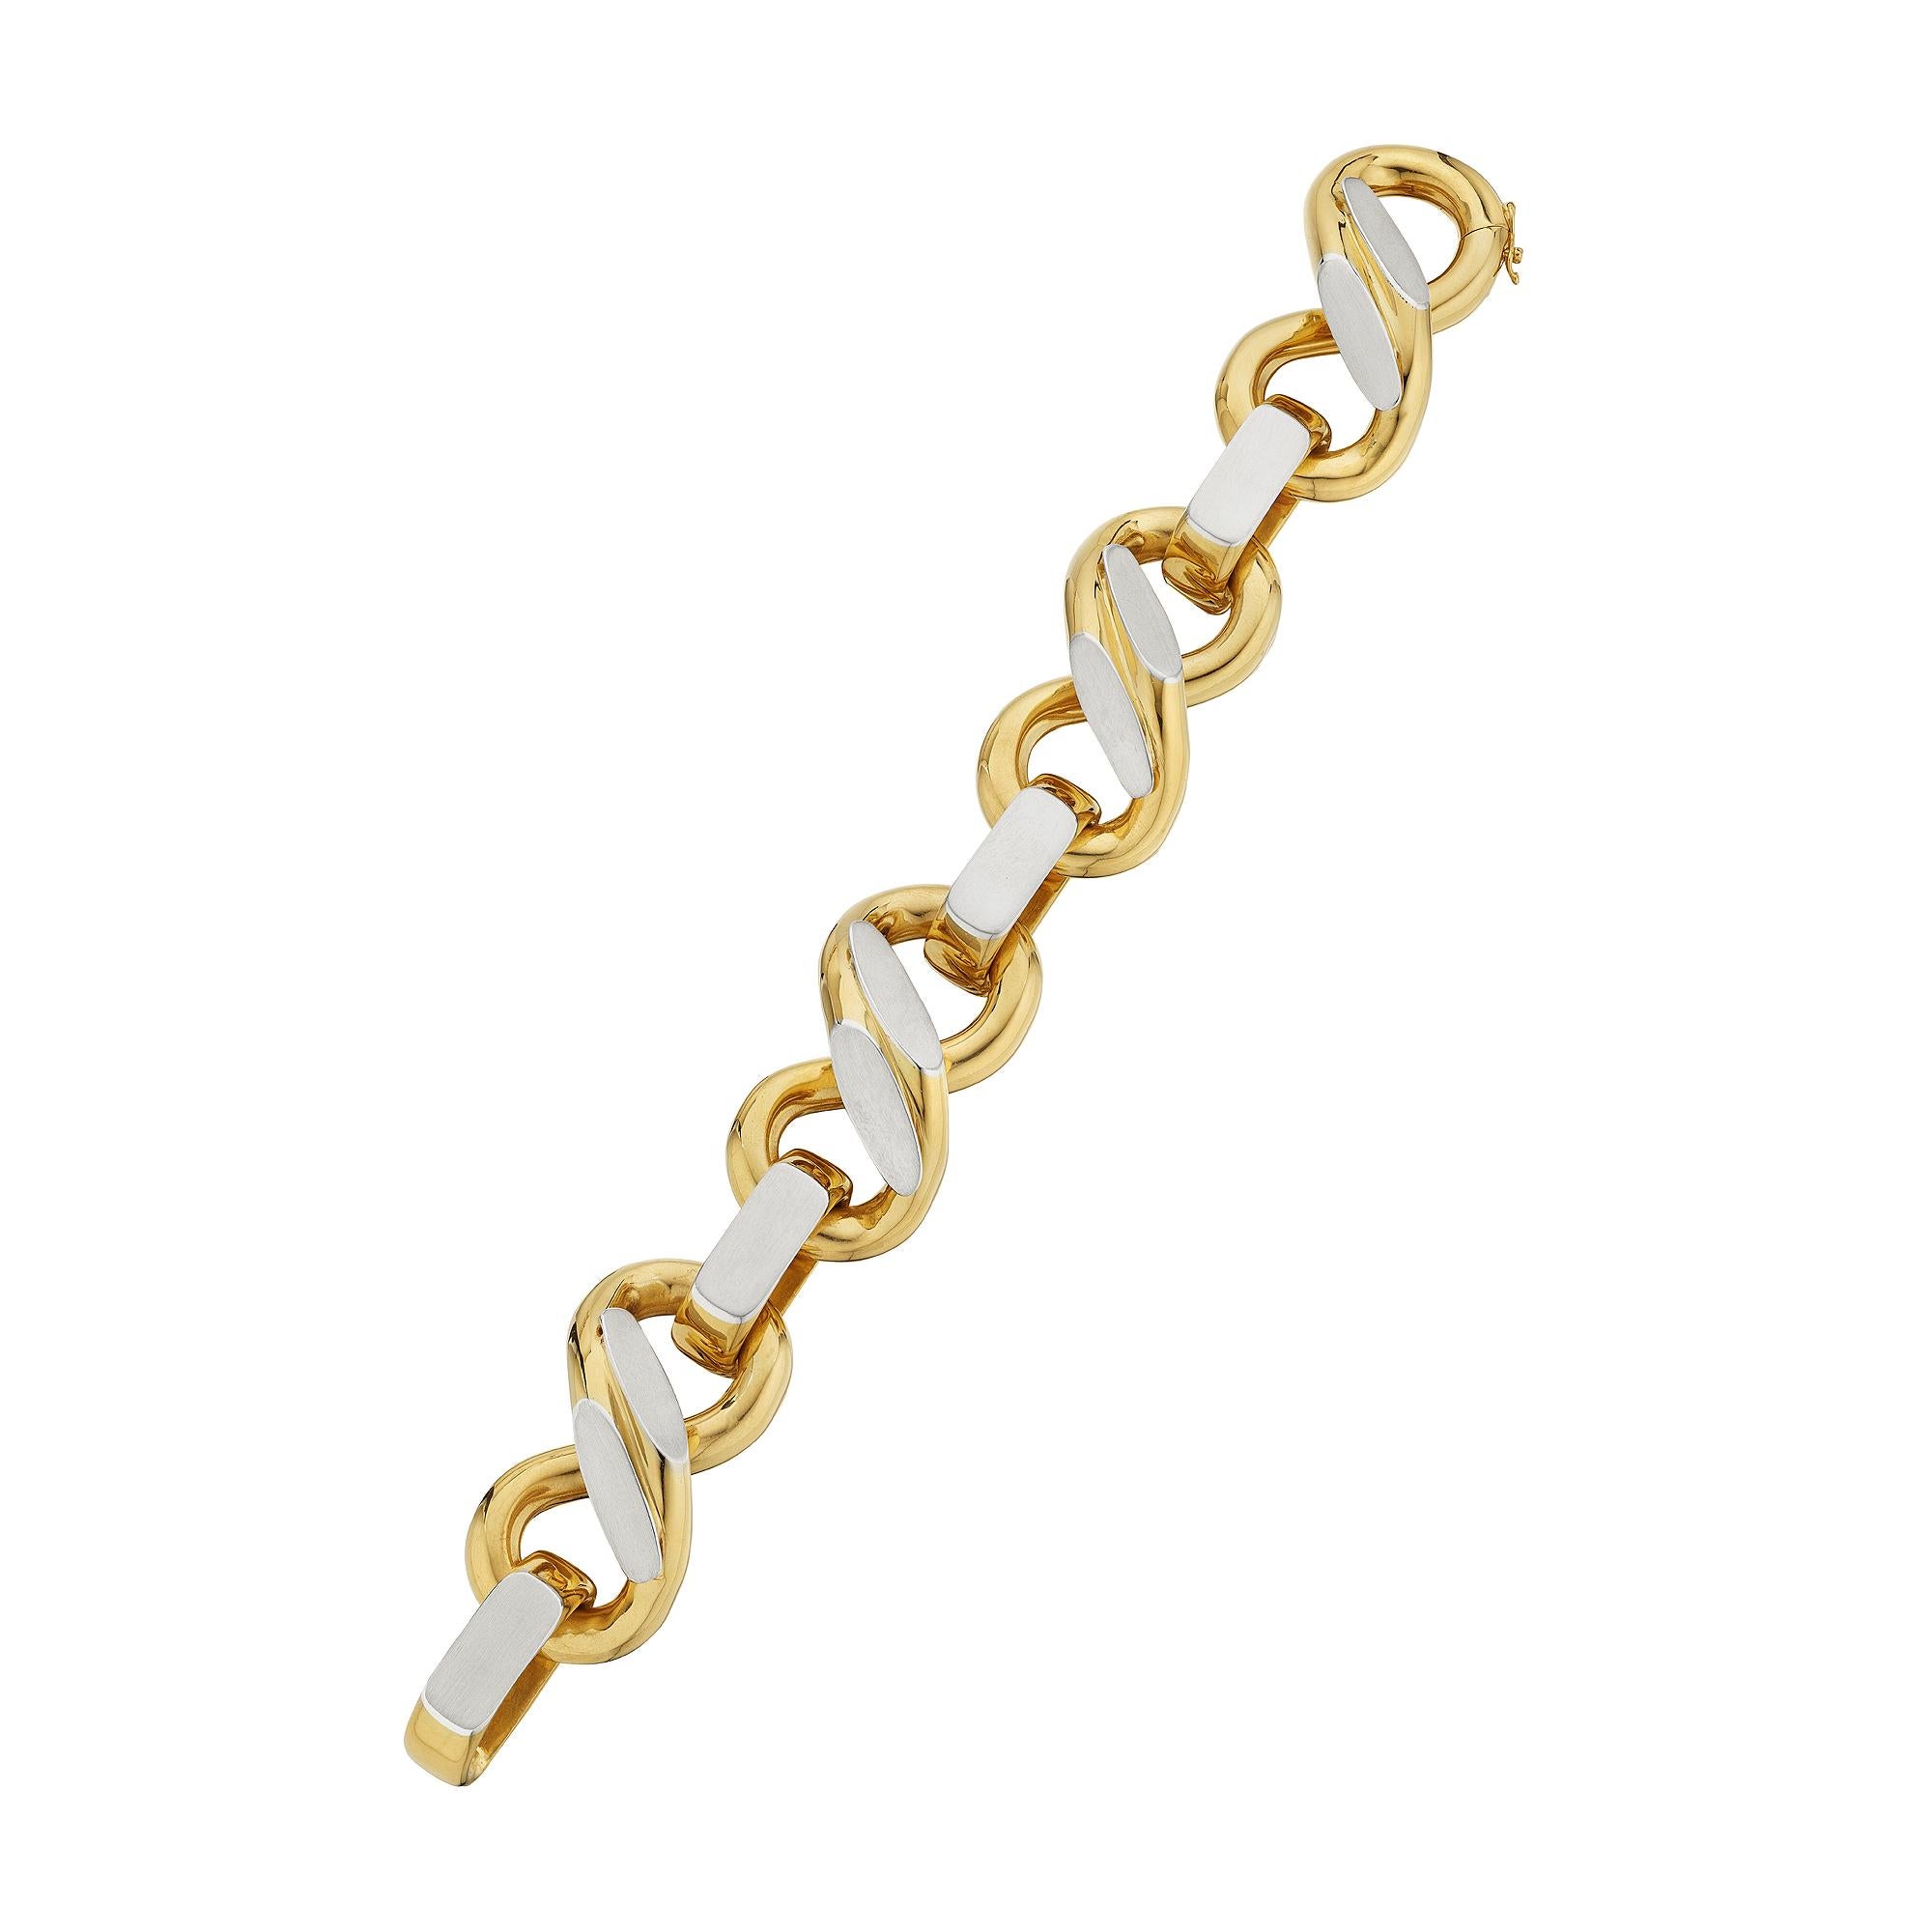 Bold and bountiful, this Bulgari modernist bi-colored white and yellow gold bracelet is the ultimate statement piece.  With four full and rounded figure-eight 18 karat yellow gold links contrasted with eight applied 18 karat white gold flat oval